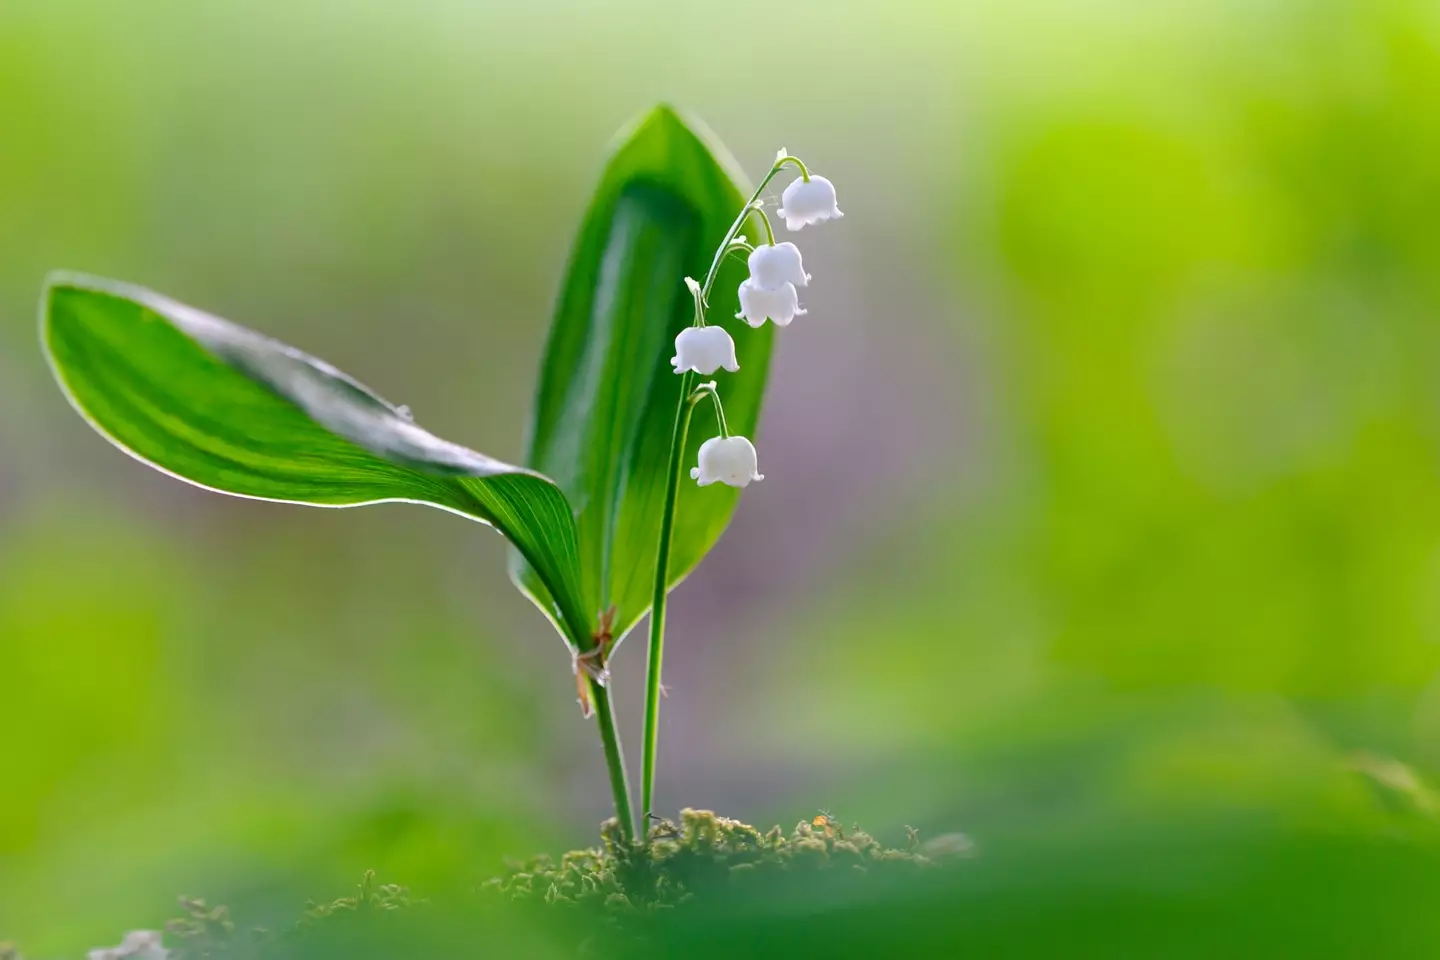 The Lily of the Valley is easily spotted by its distinctive white flowers.